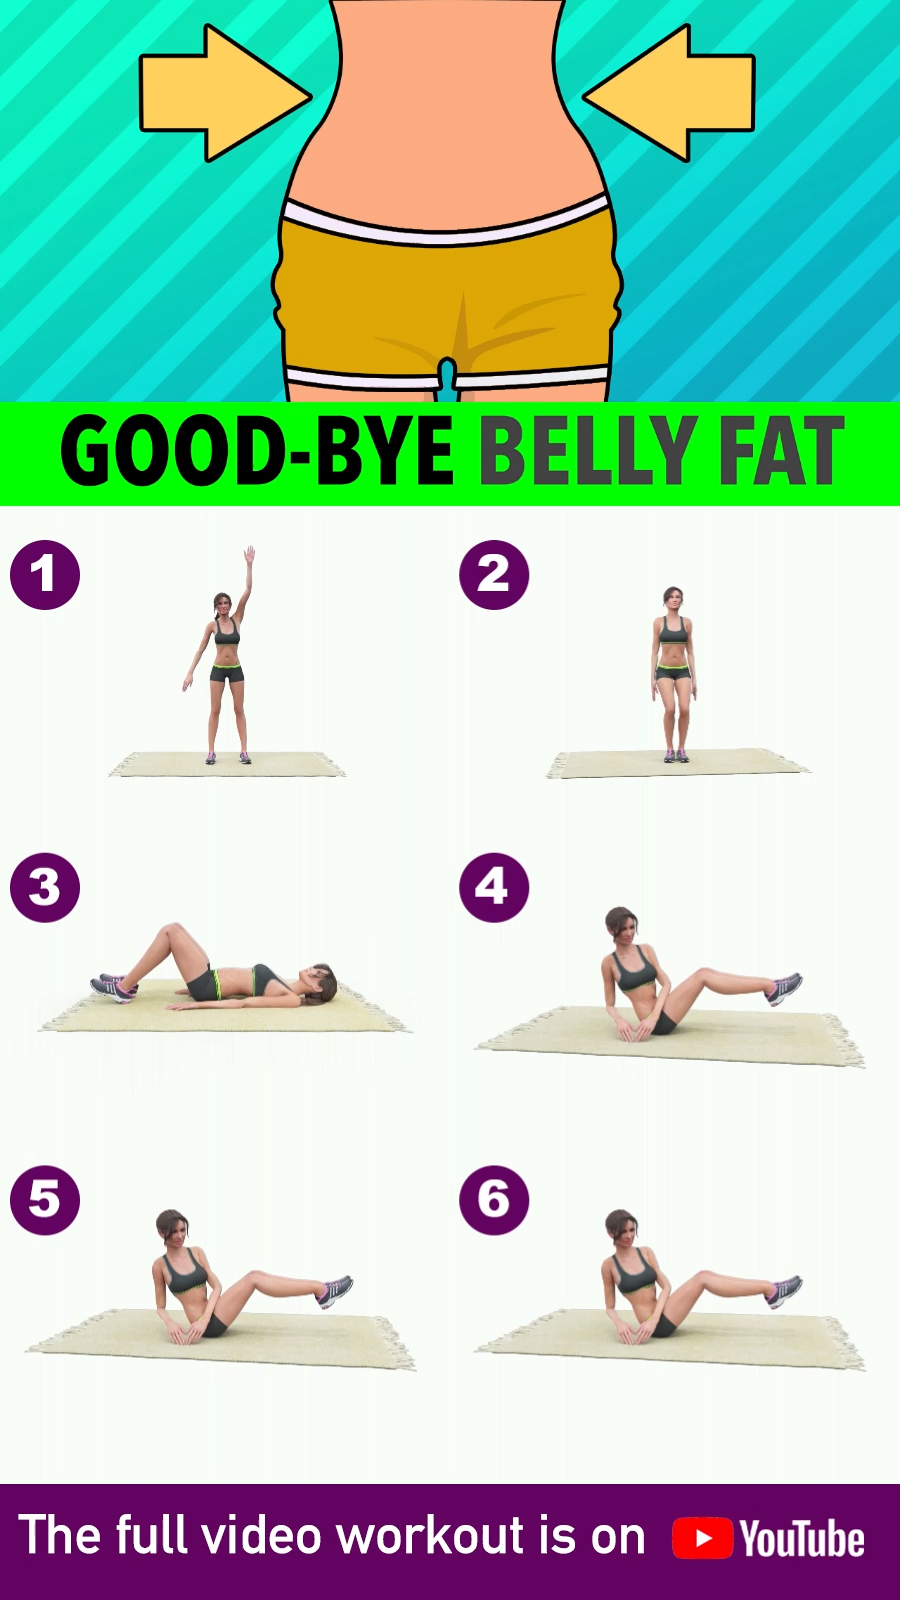 Good-Bye Belly Fat! -   17 fitness Exercises video ideas